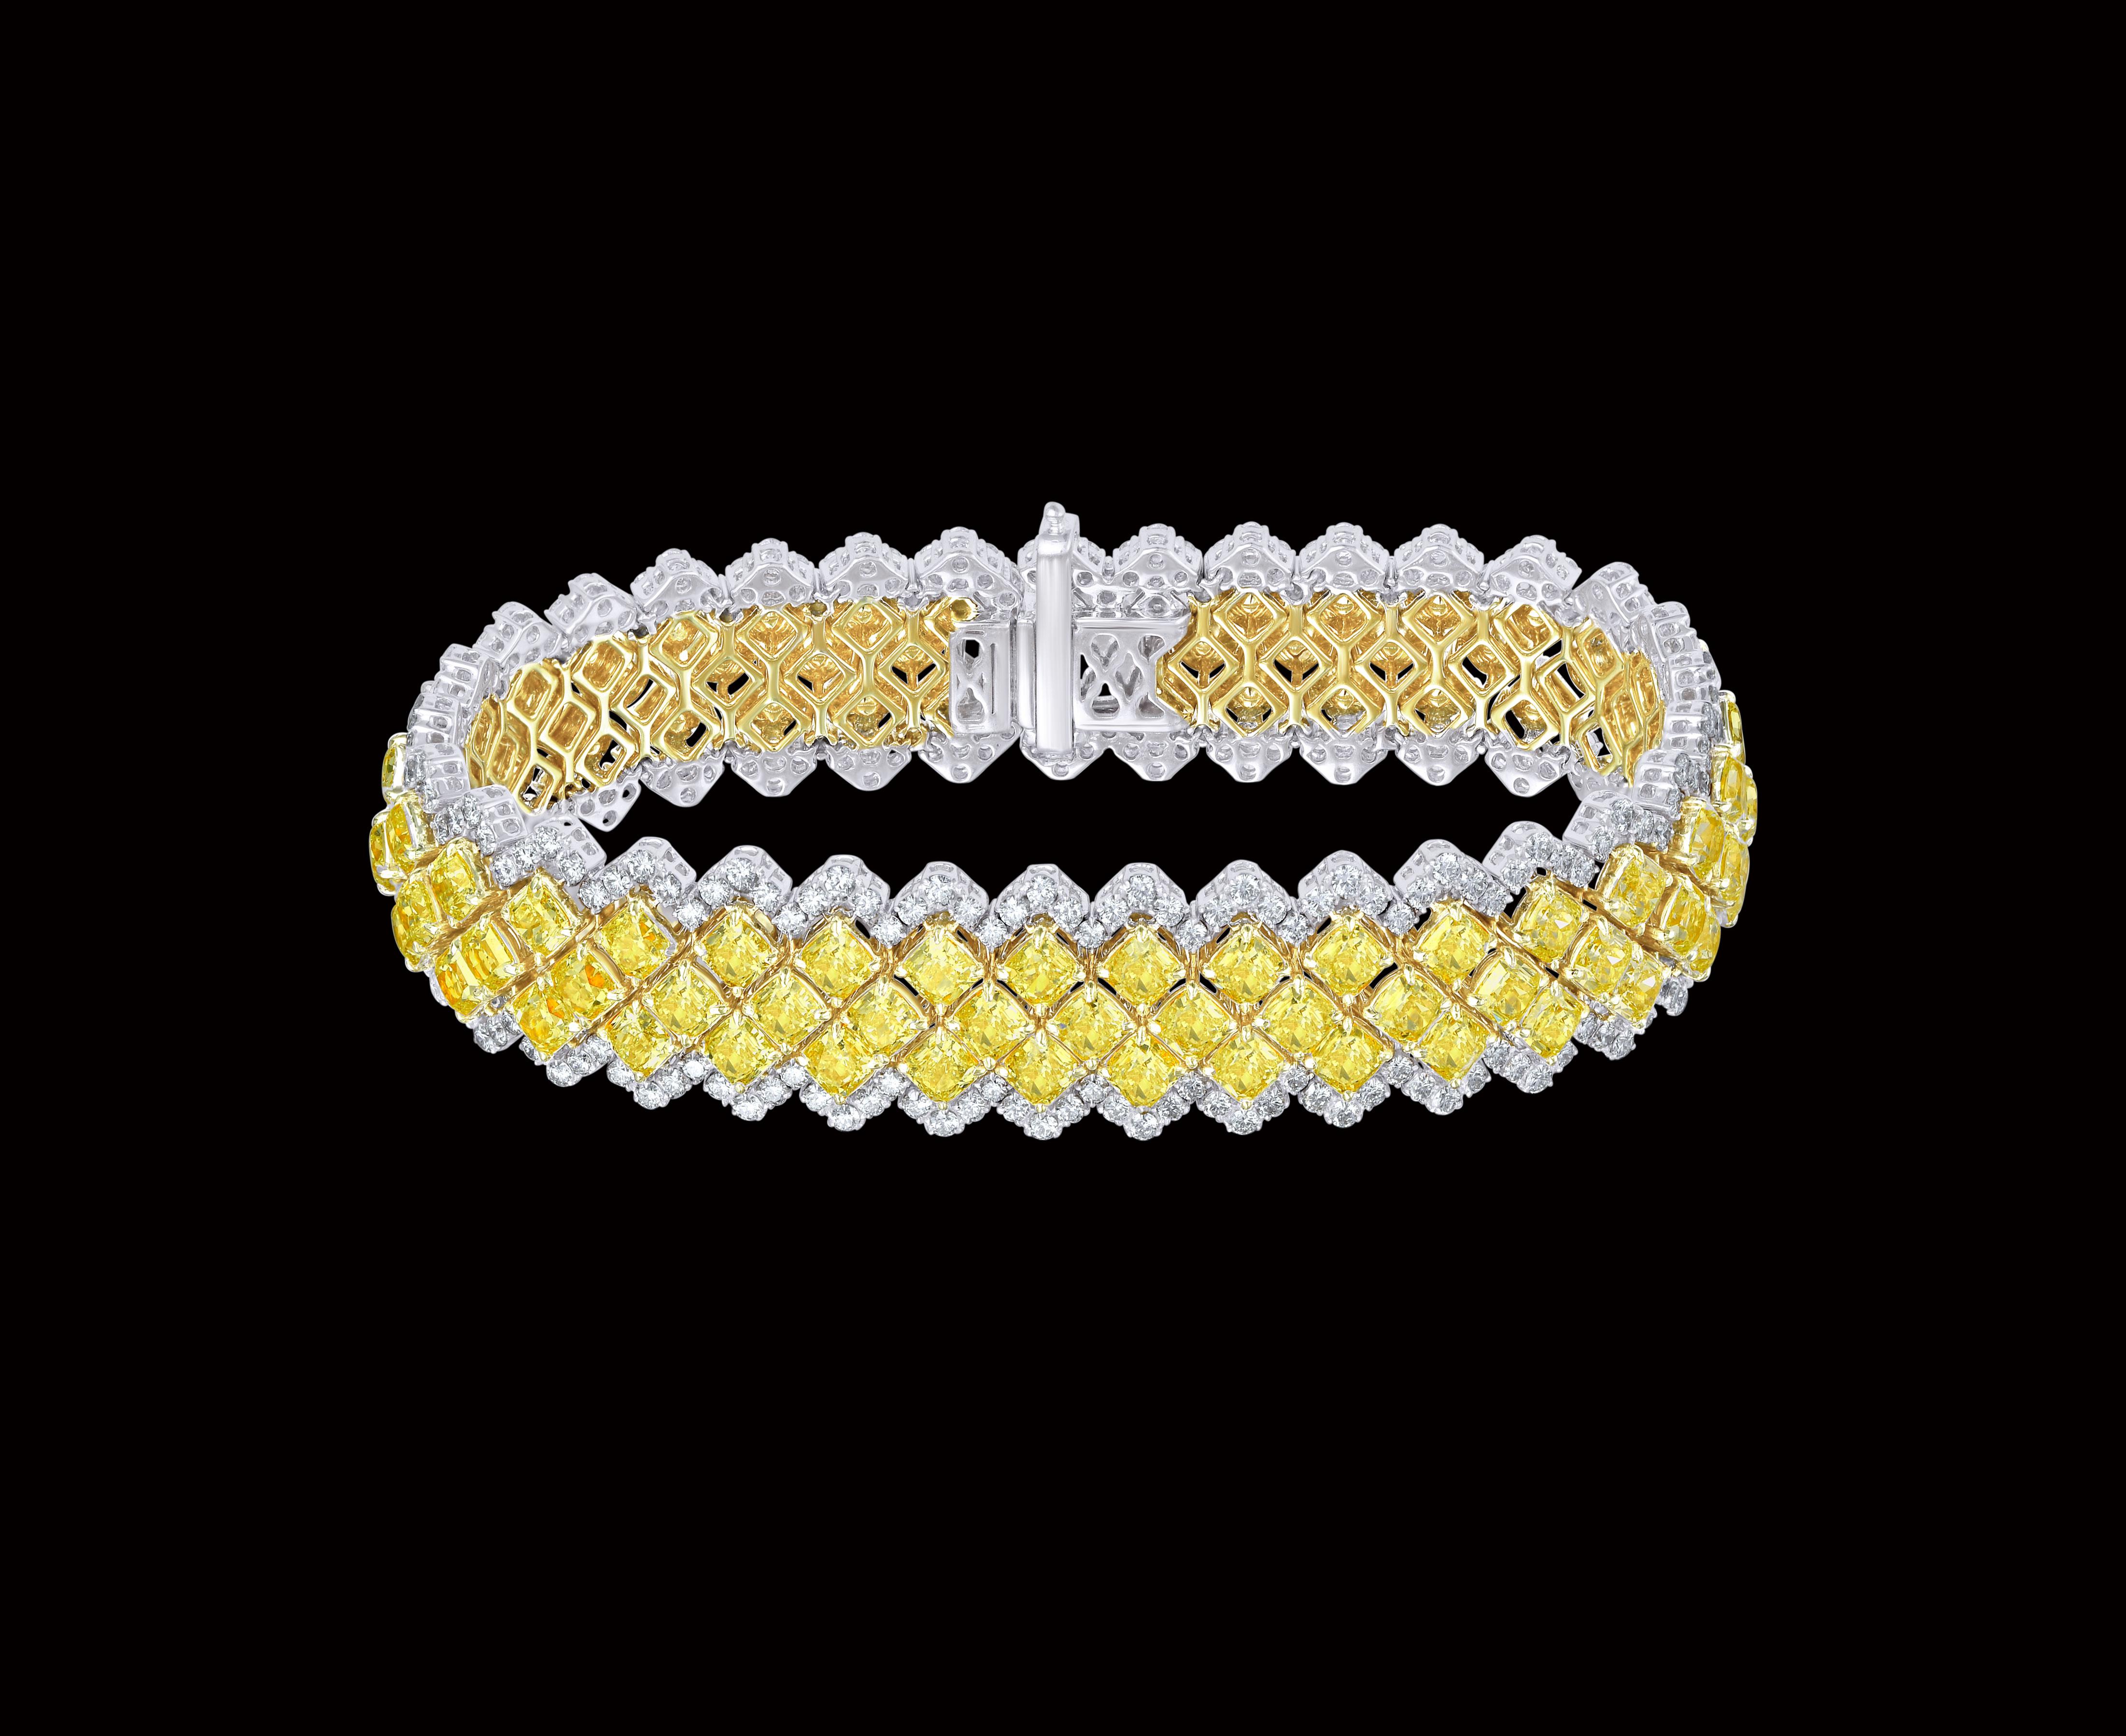 Enthralling Fancy Yellow Radiant 3 row  tennis bracelet. Yellow radiant diamonds manufactured with precision to match each other, accompanied by matching white round diamonds & 18k gold to give you a perfect look for any occasion you wish to dazzle.